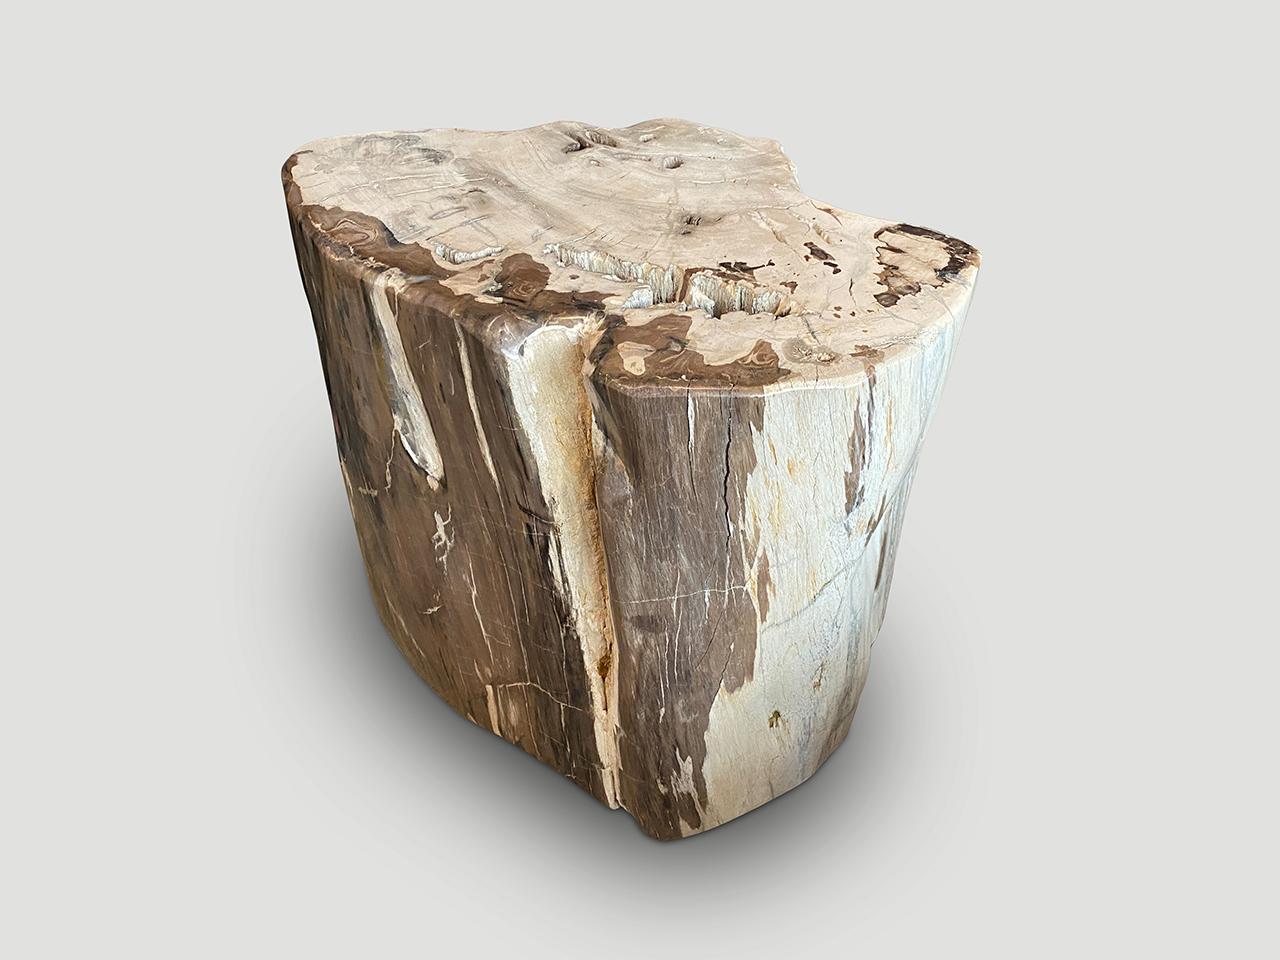 Beautiful tiger tones on this ancient petrified wood side table. We have a collection of three all cut from the same log. Final images show two placed together as a coffee table. The price reflects the one main image.

It’s fascinating how Mother